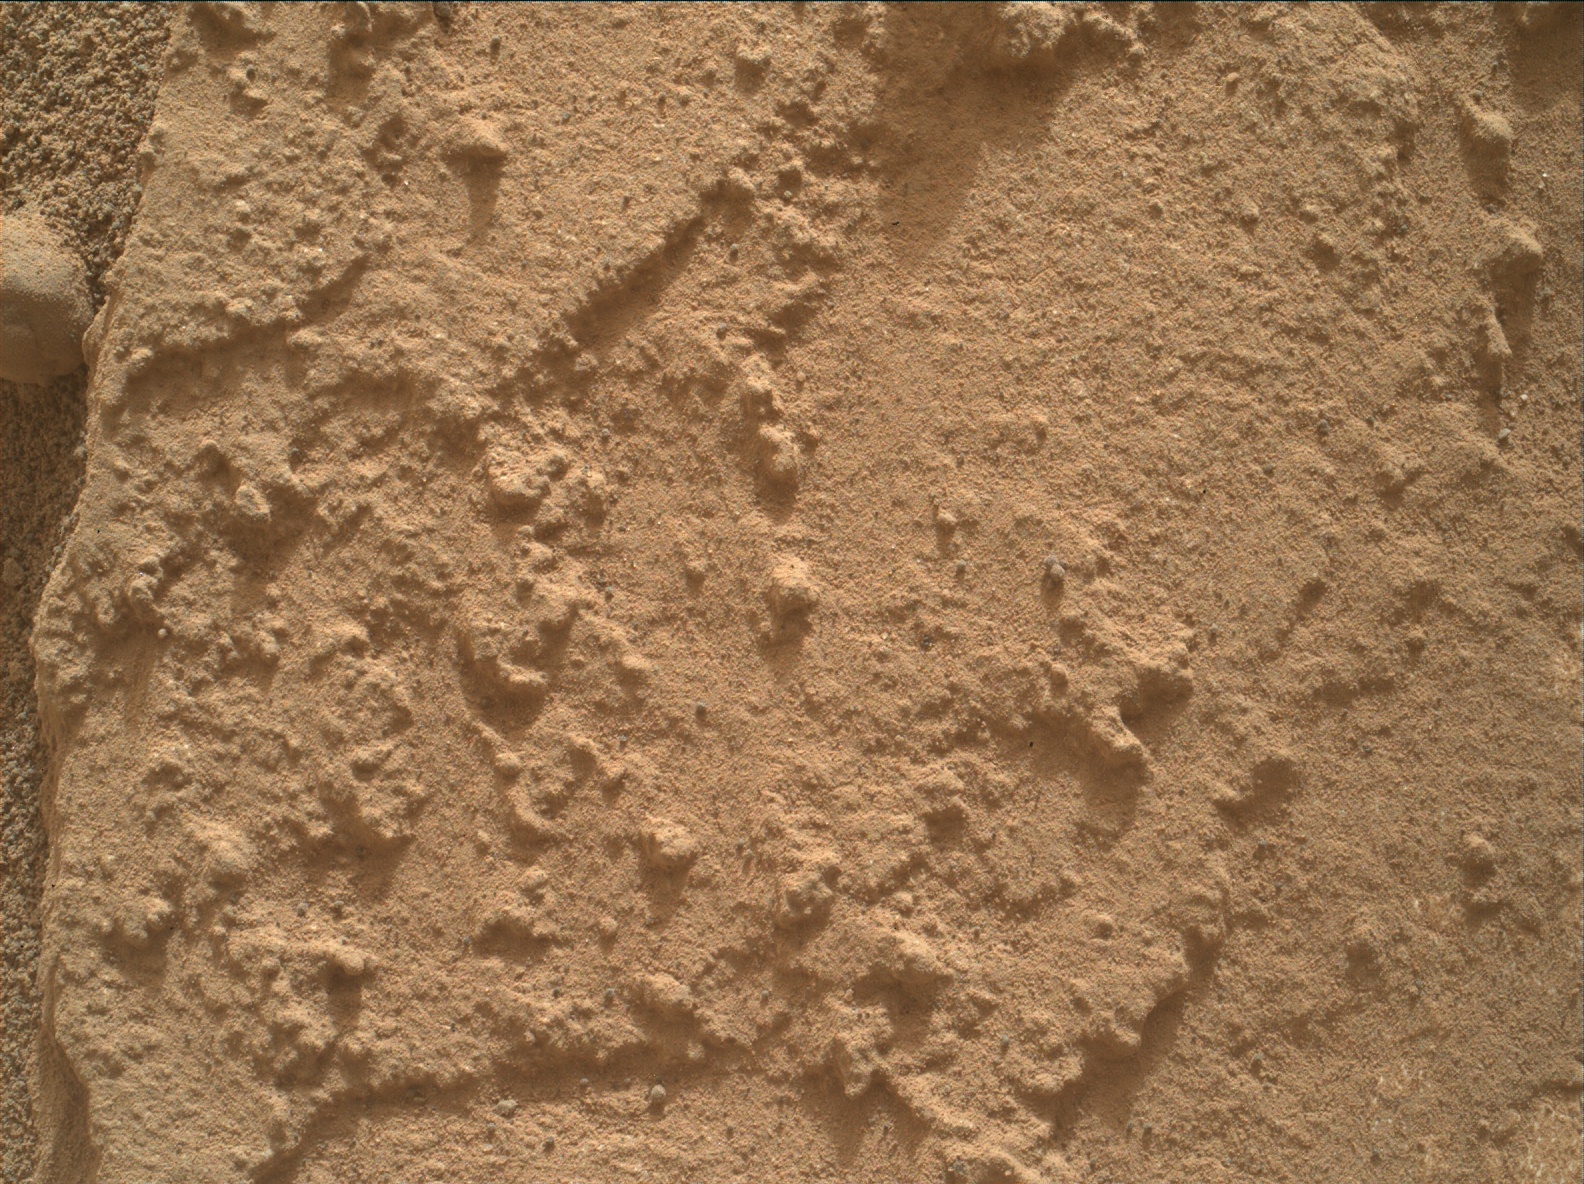 Nasa's Mars rover Curiosity acquired this image using its Mars Hand Lens Imager (MAHLI) on Sol 3461